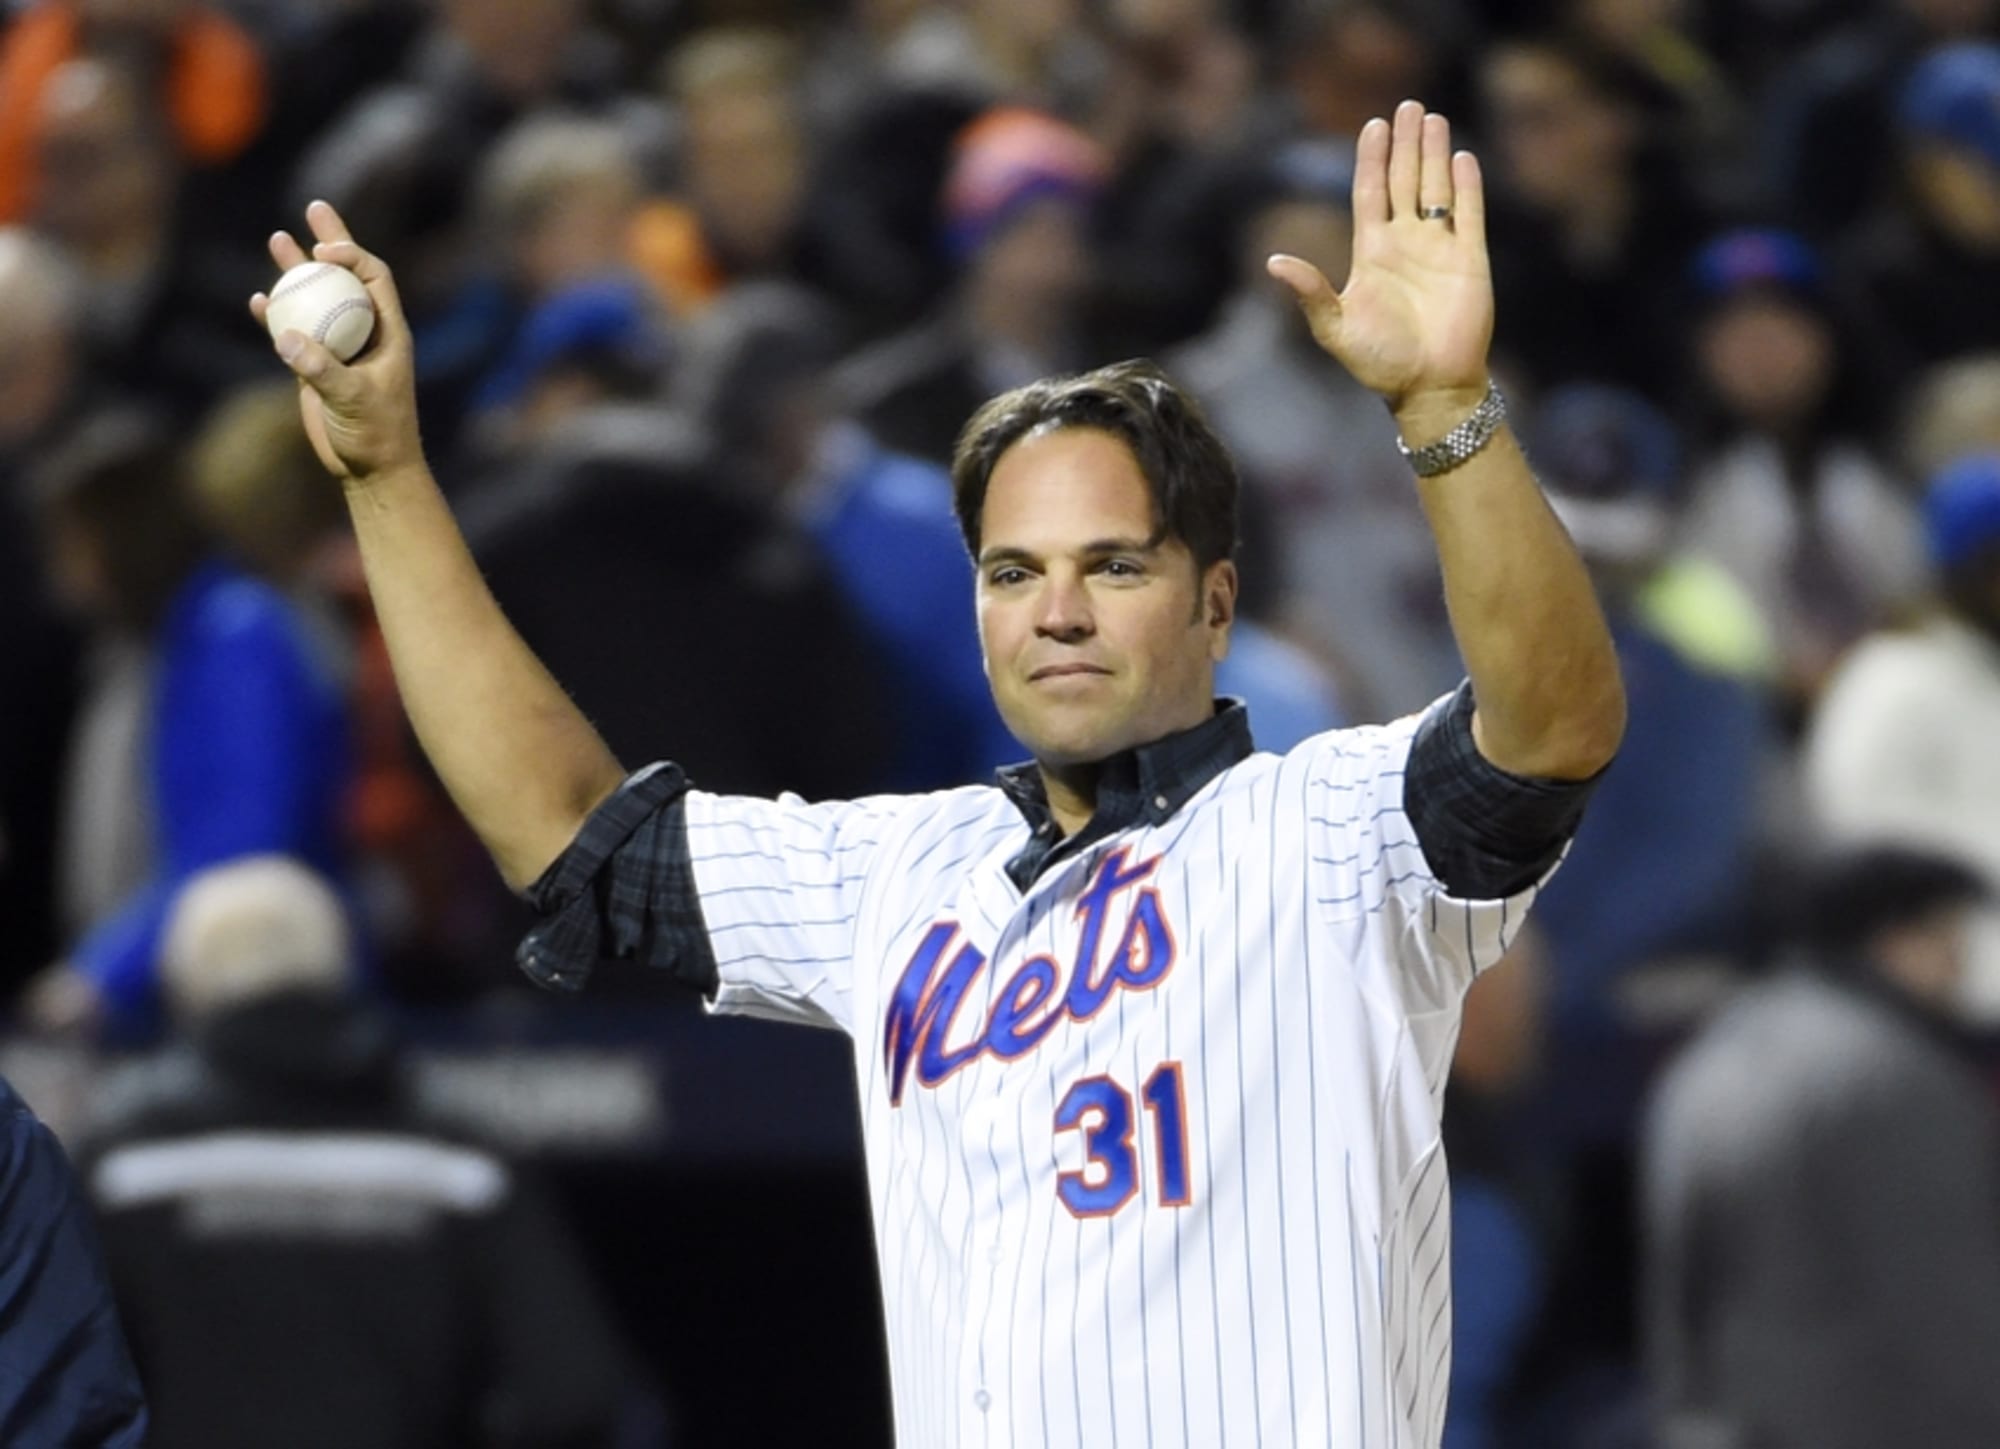 Mike Piazza Elected To Major League Baseball Hall of Fame